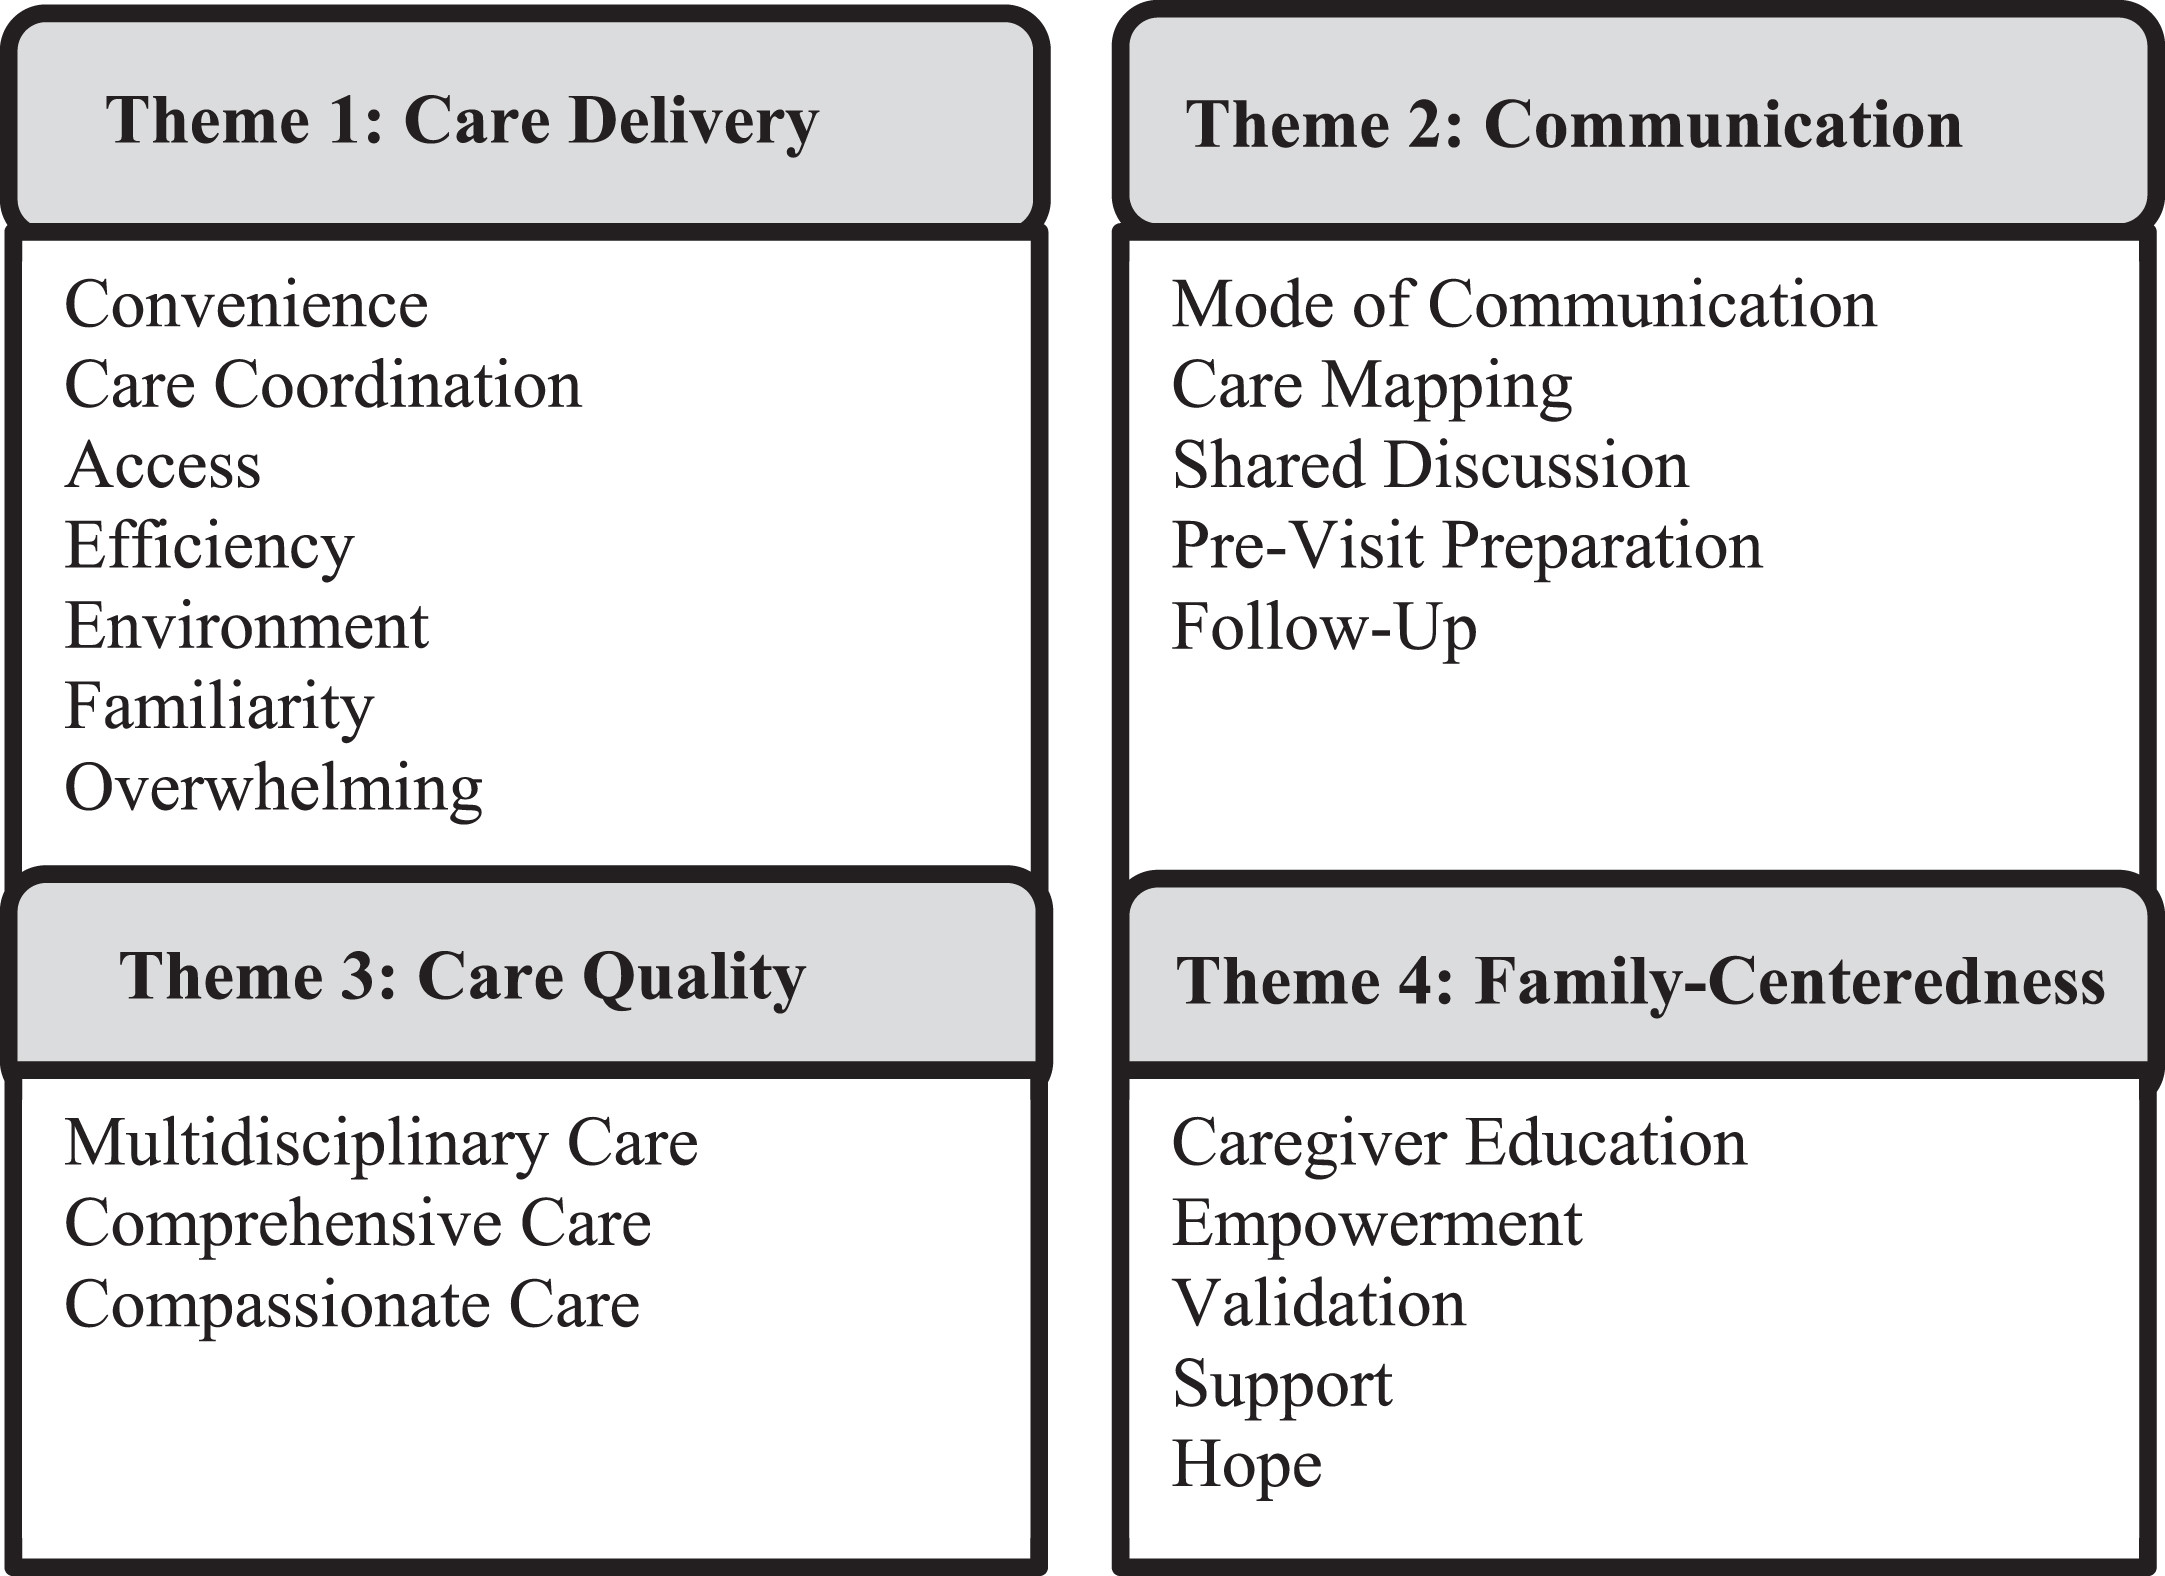 Themes & Notable Sub-Themes. Each theme was divided into sub-themes to further characterize caregiver sentiments. For example, the theme of Care Delivery was divided into the following sub-themes in order of frequency: Convenience, Care Coordination, Access, Efficiency, Environment, Familiarity, and Overwhelming.